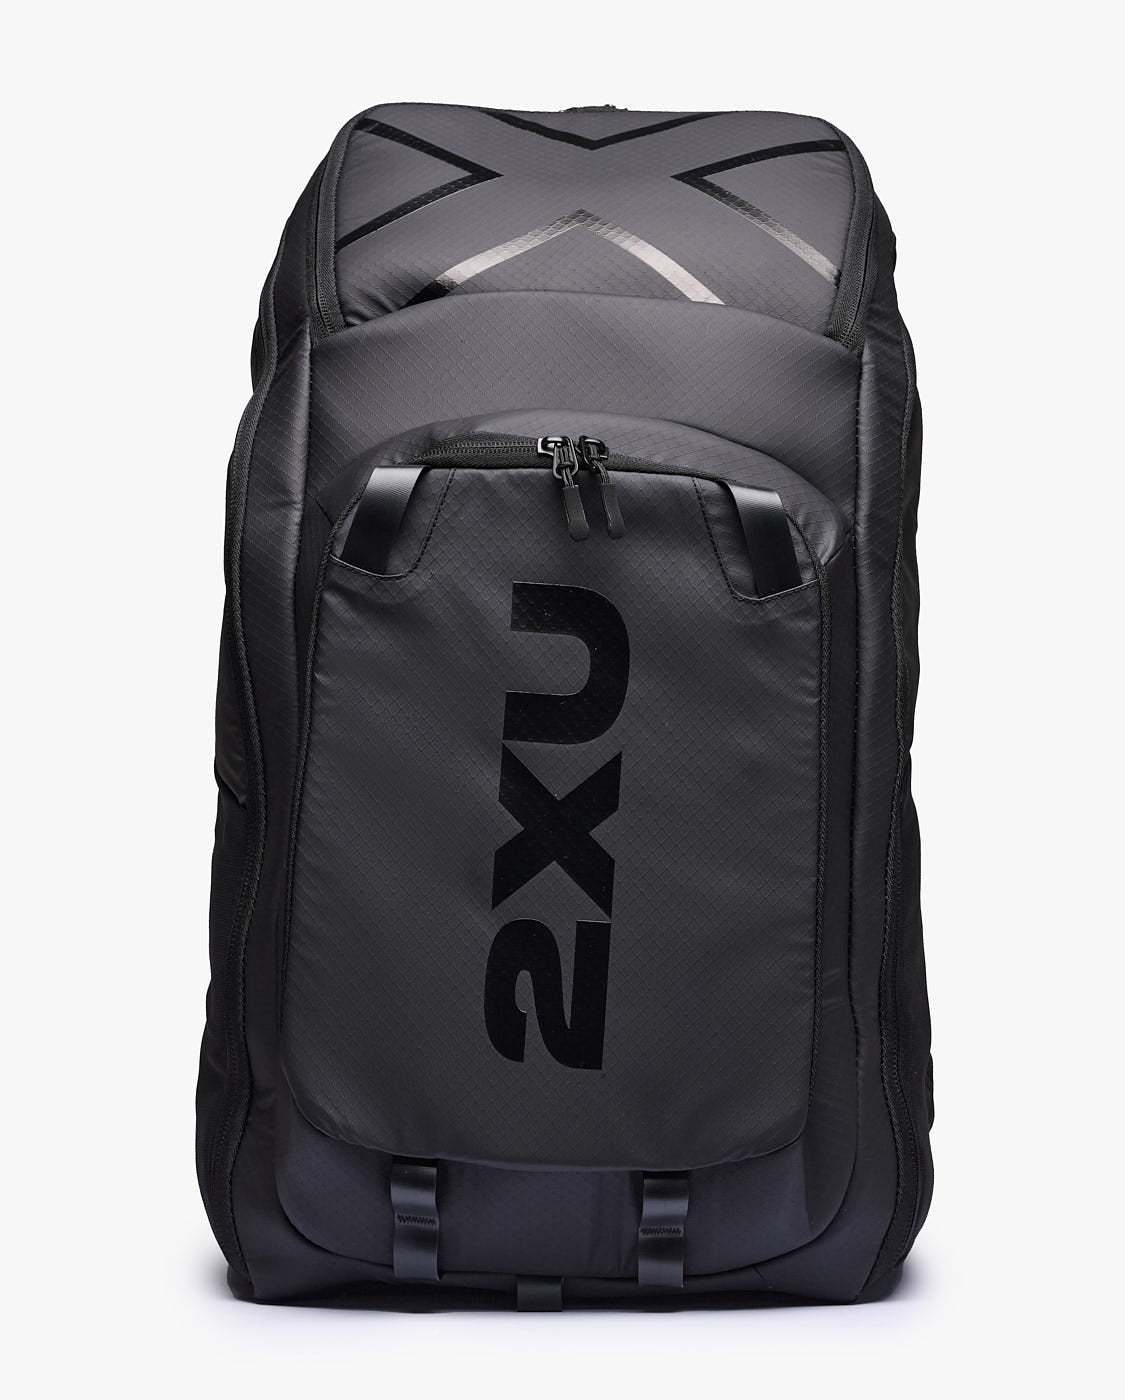 Transition Backpack – 2XU